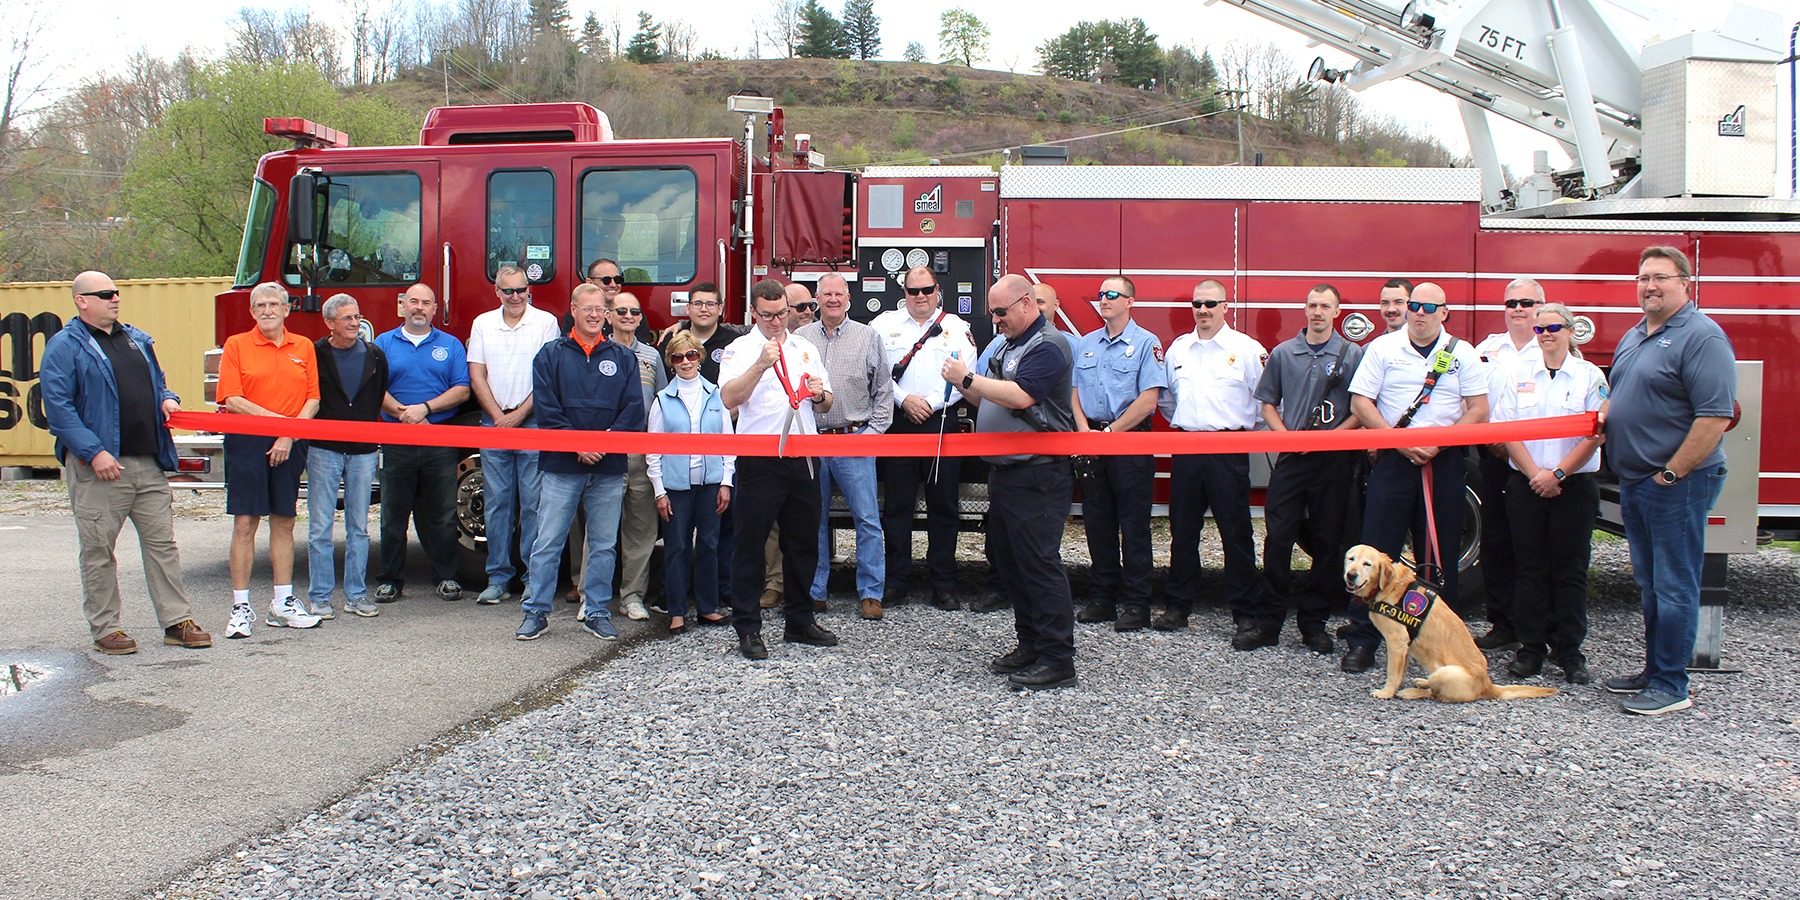 The Princeton Fire Department and city officials at a ribbon cutting ceremony for a new firetruck for the department.